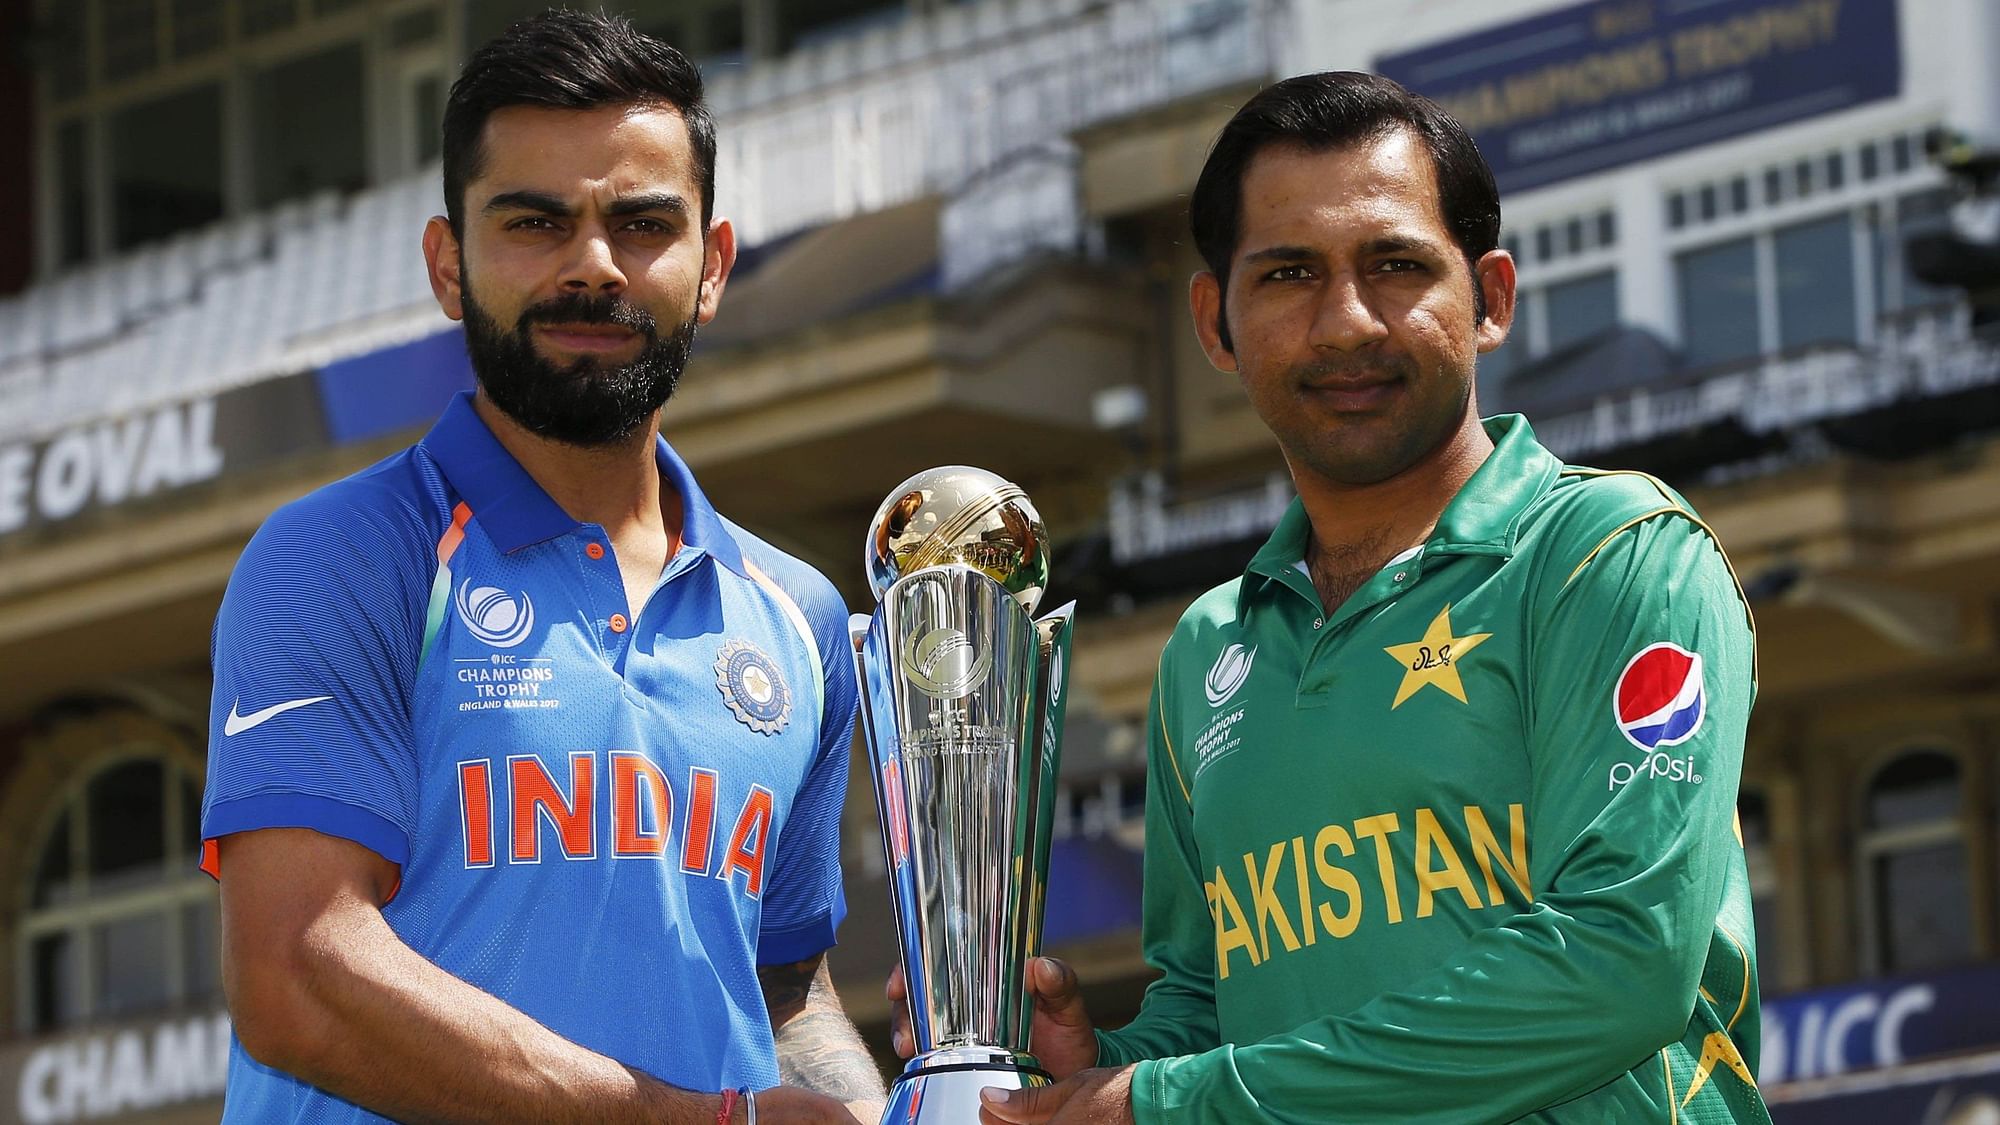 Virat Kohli and Sarfraz Ahmed pose with the trophy ahead of the ICC Champions Trophy 2017 final between India and Pakistan at London.